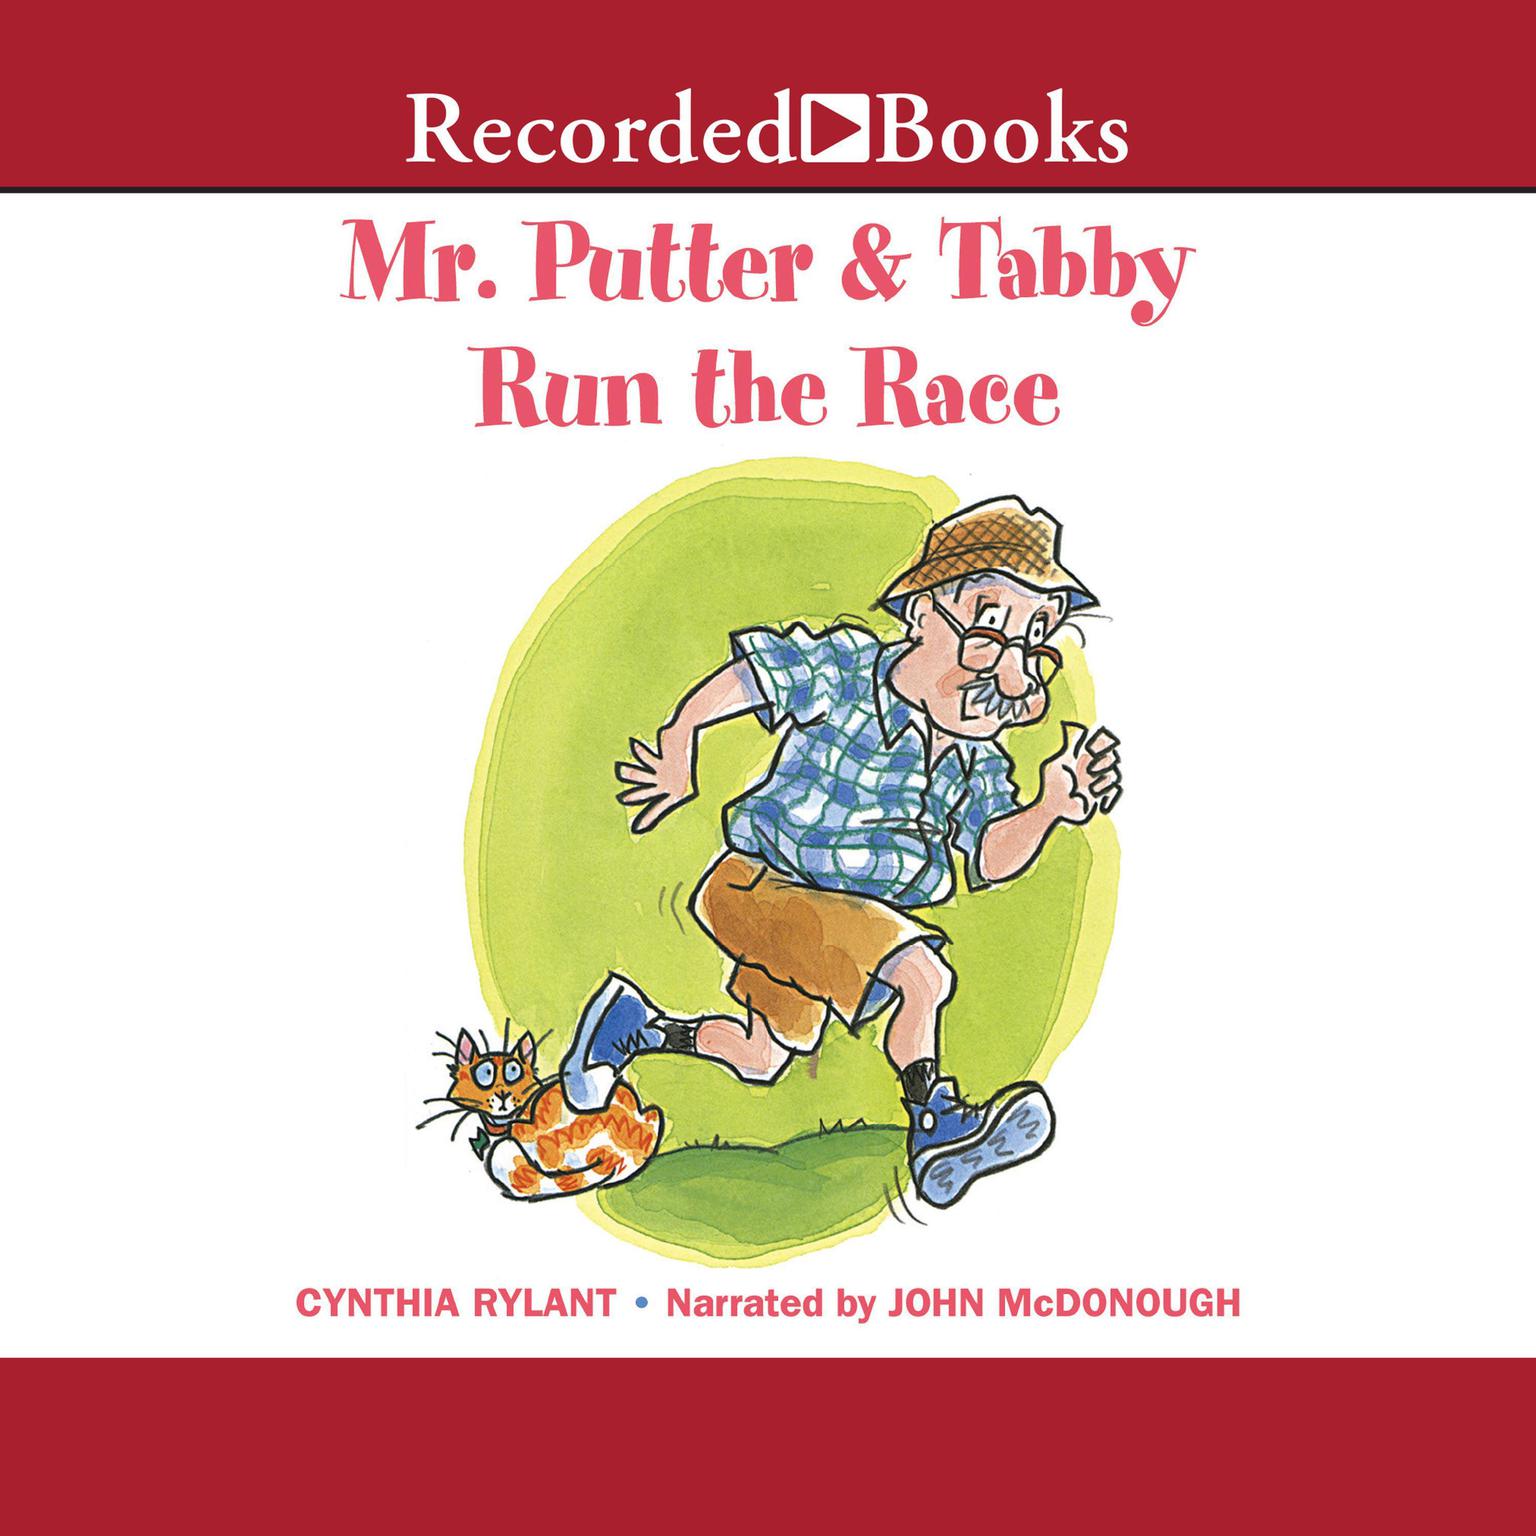 Mr. Putter & Tabby Run the Race Audiobook, by Cynthia Rylant